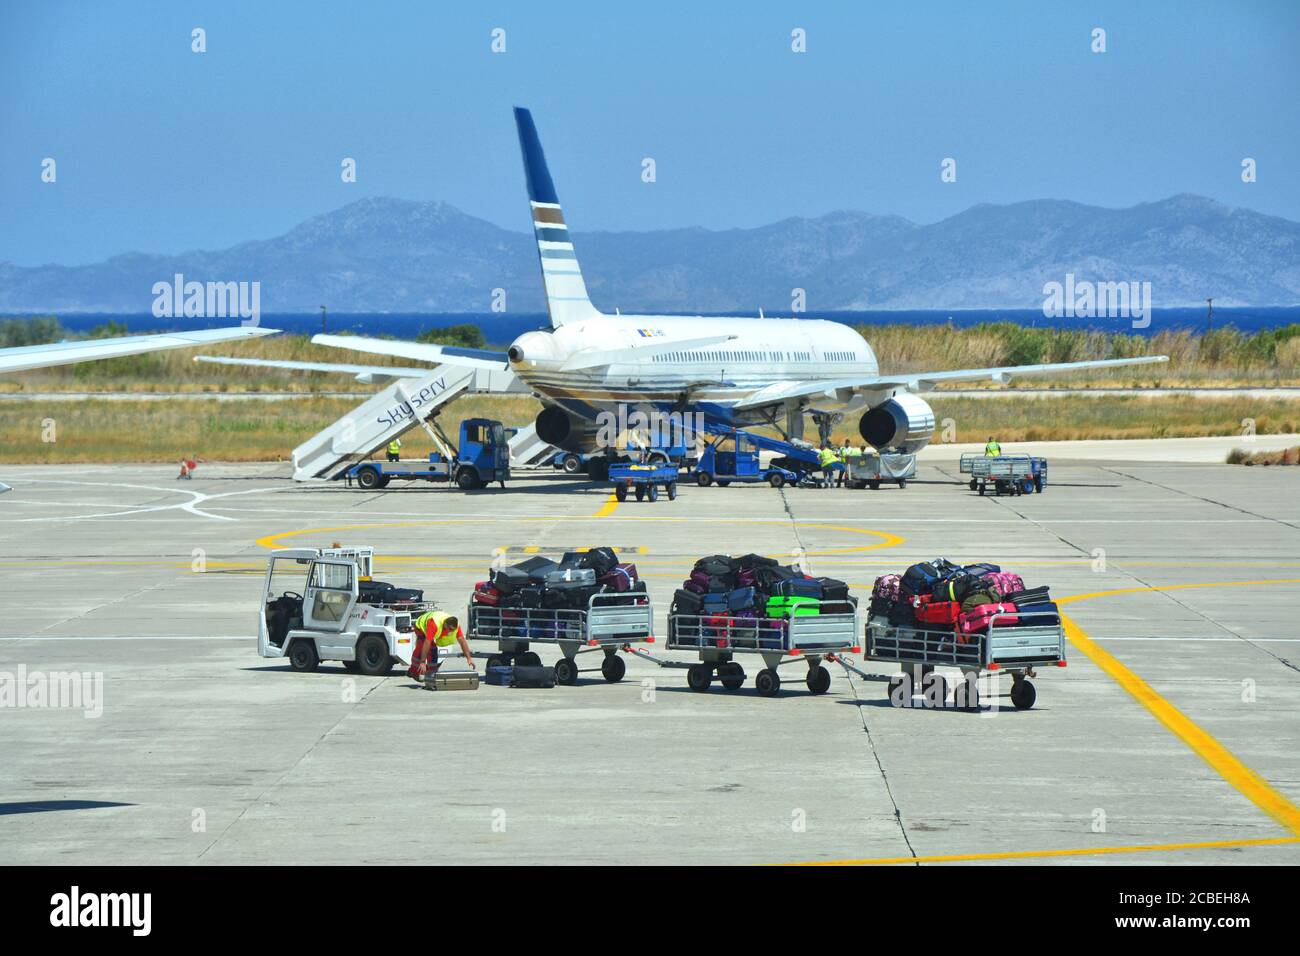 RHODES, GREECE - JULY 18, 2016 : Privilege Style spanish airline plane load in Rhodes island in Greece. Stock Photo